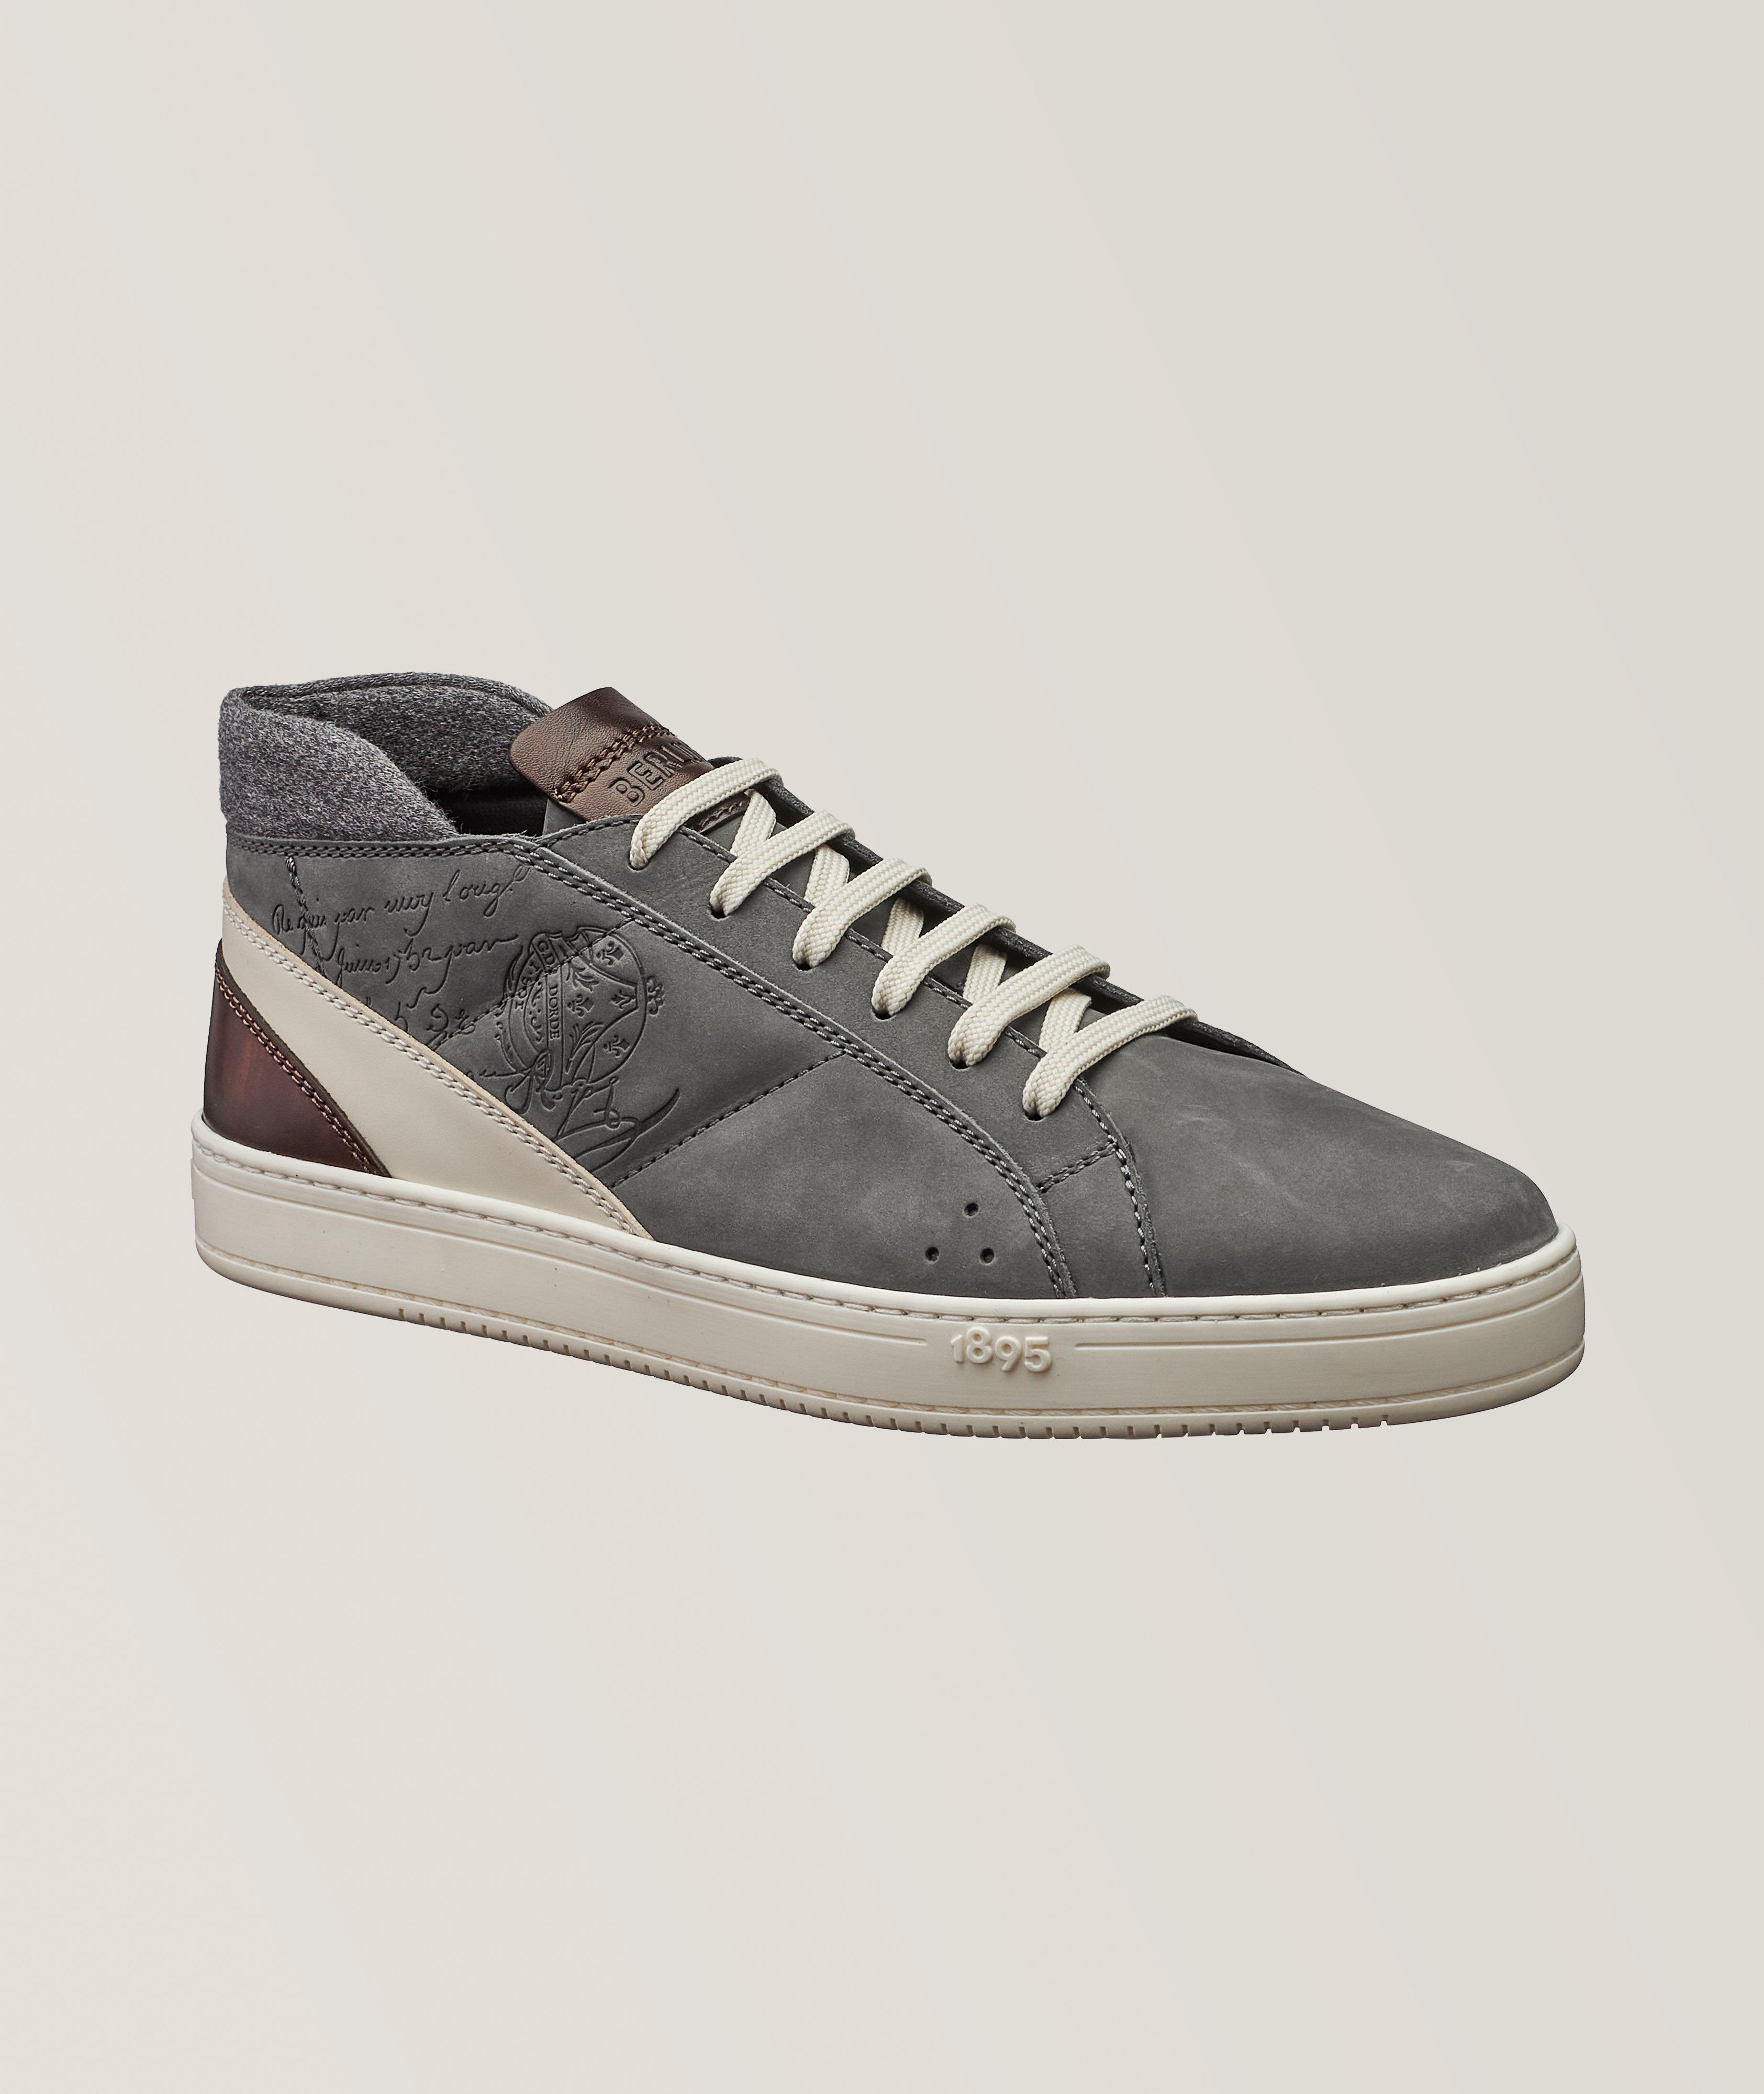 Playtime Leather Sneakers image 0